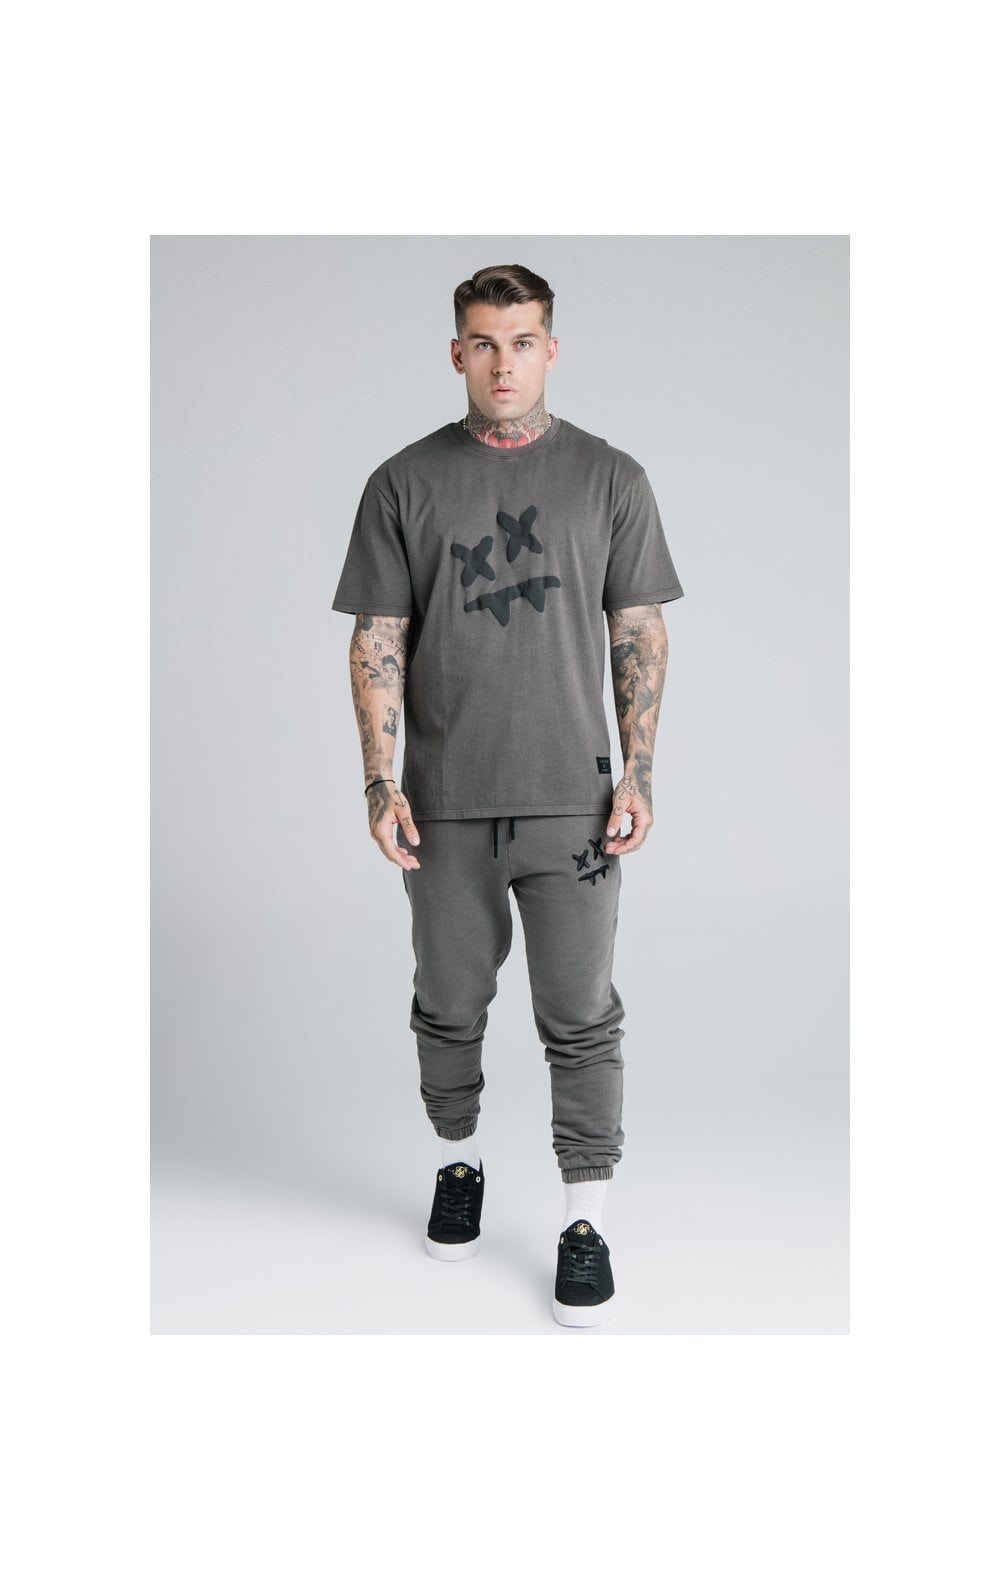 SikSilk X Steve Aoki S/S Oversize Essential Tee – Washed Grey (3)